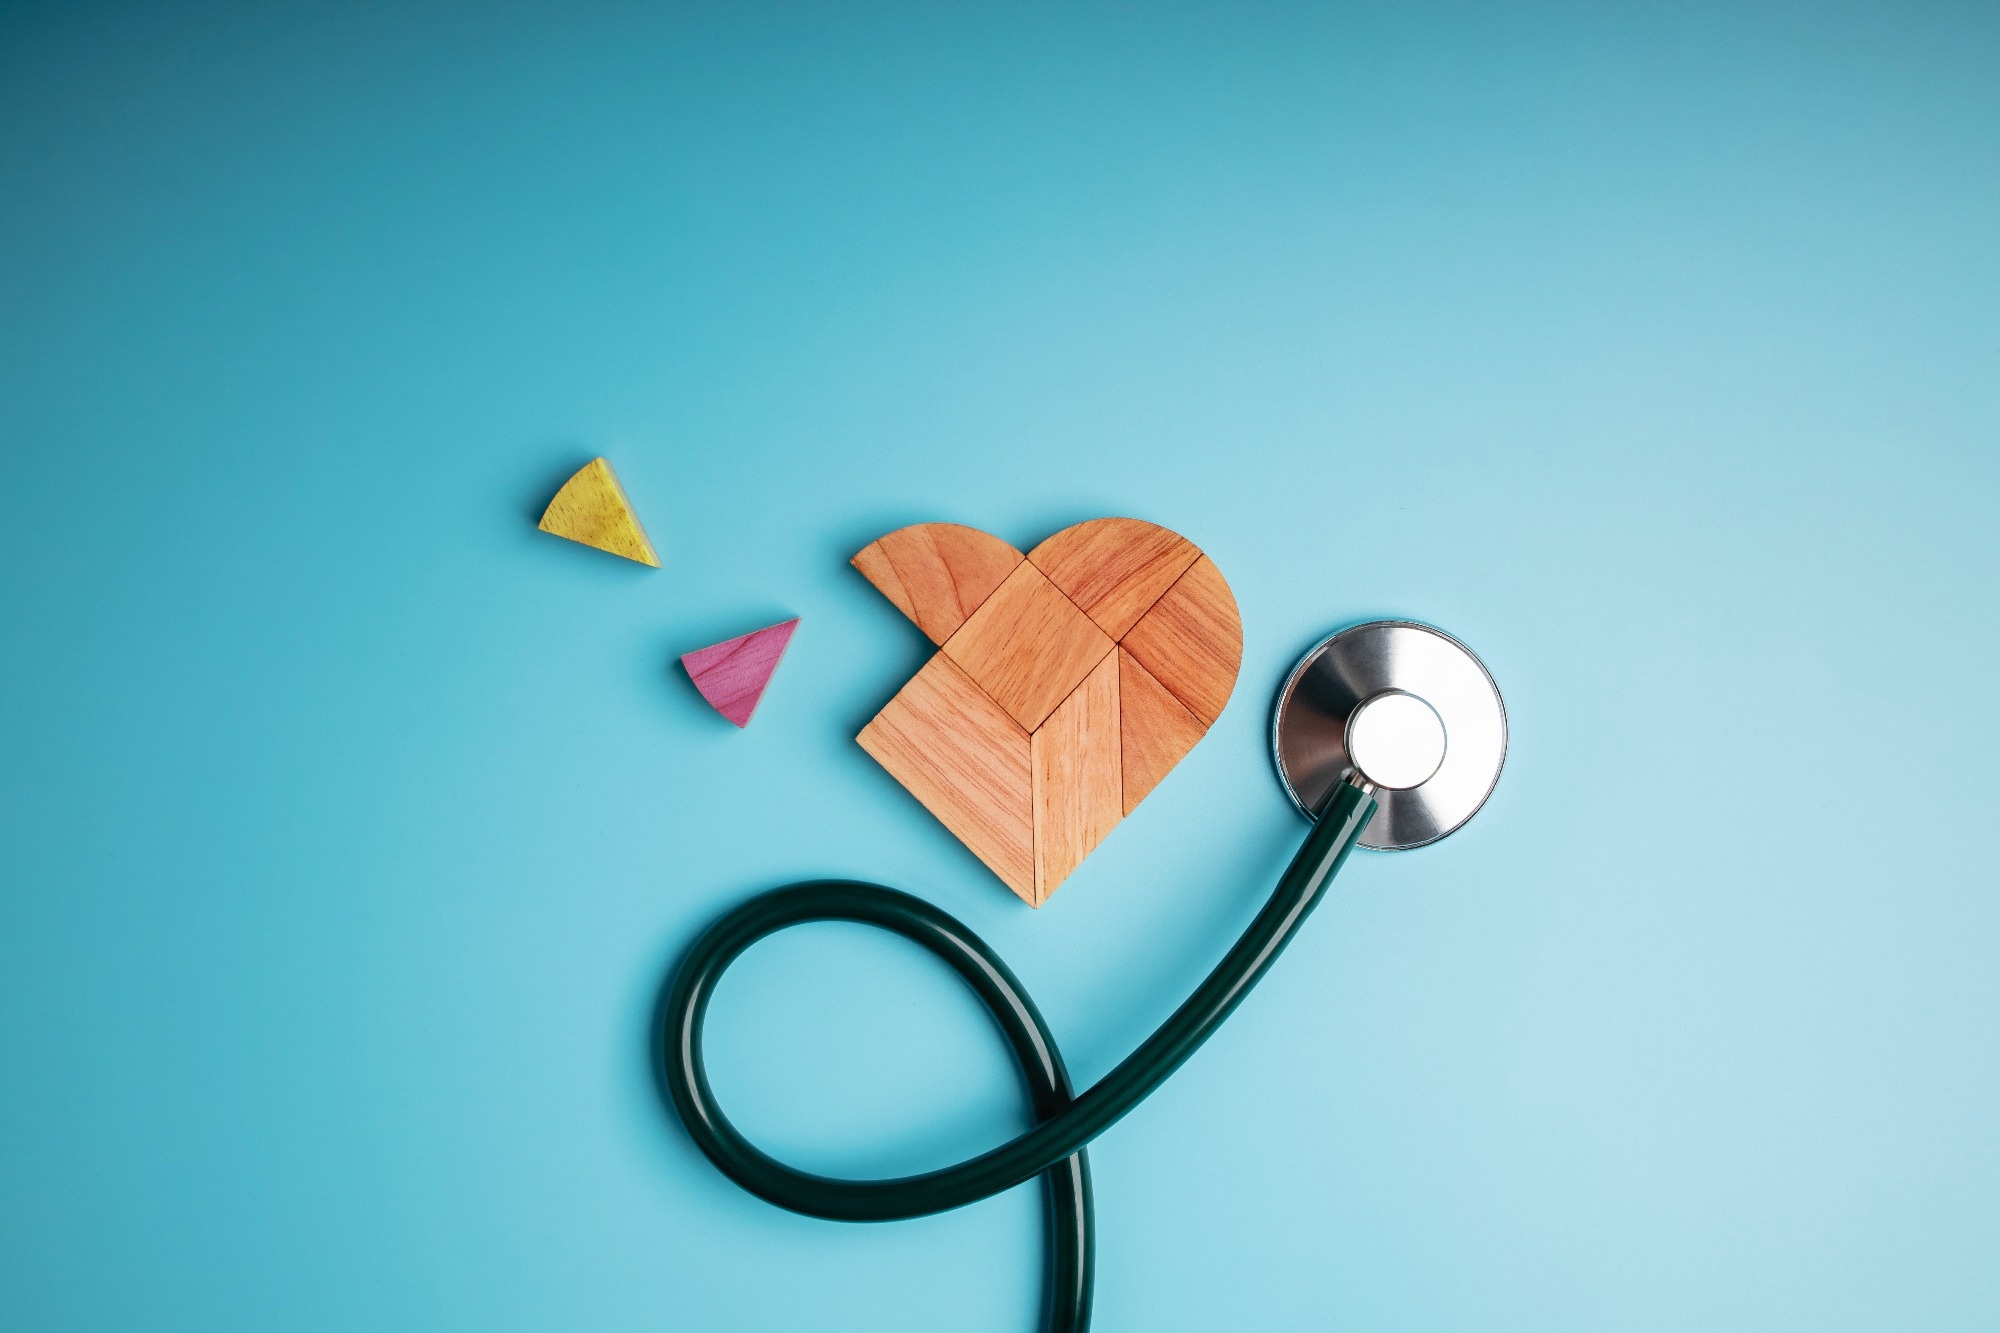 Study: Risk of cancer history in cardiovascular disease among individuals with hypertension. Image Credit: Black Salmon / Shutterstock